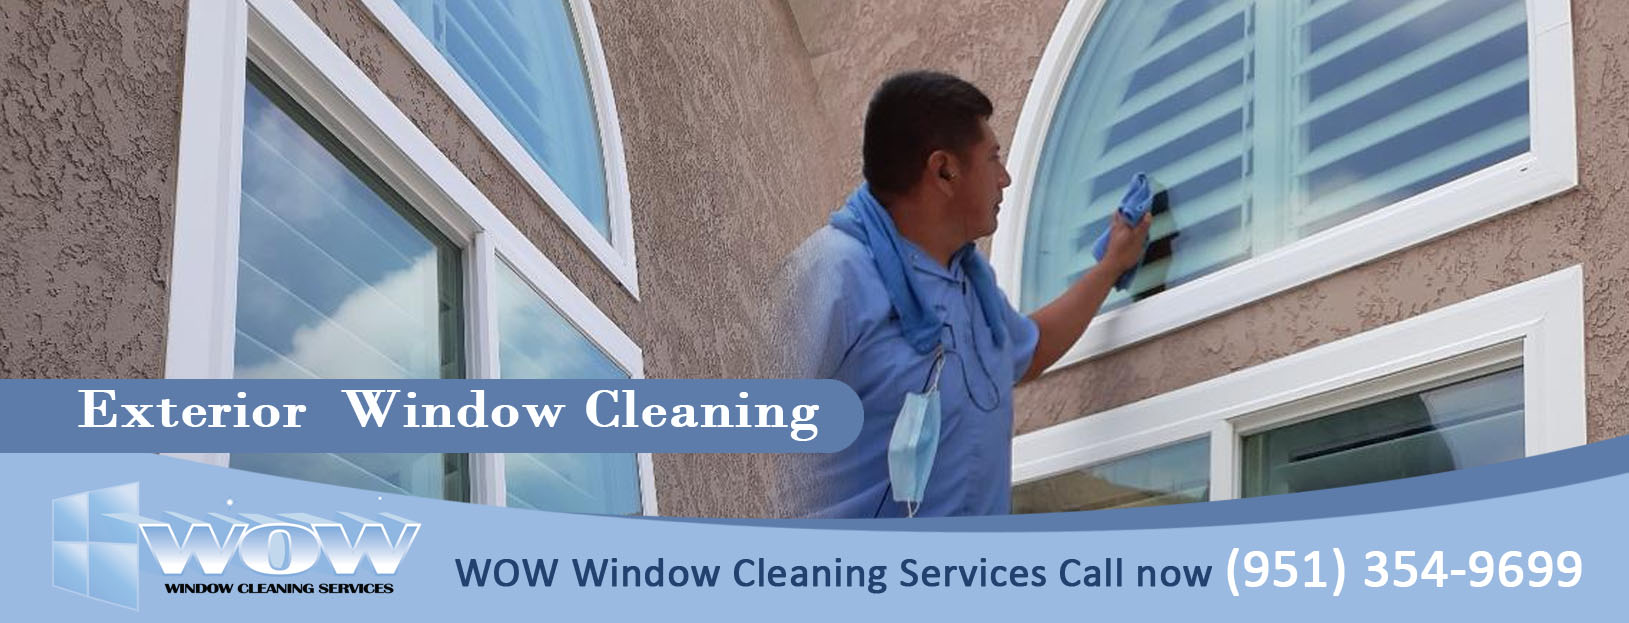 Moreno Valley Riverside Windown Cleaning, house pressure wash, shutters 1